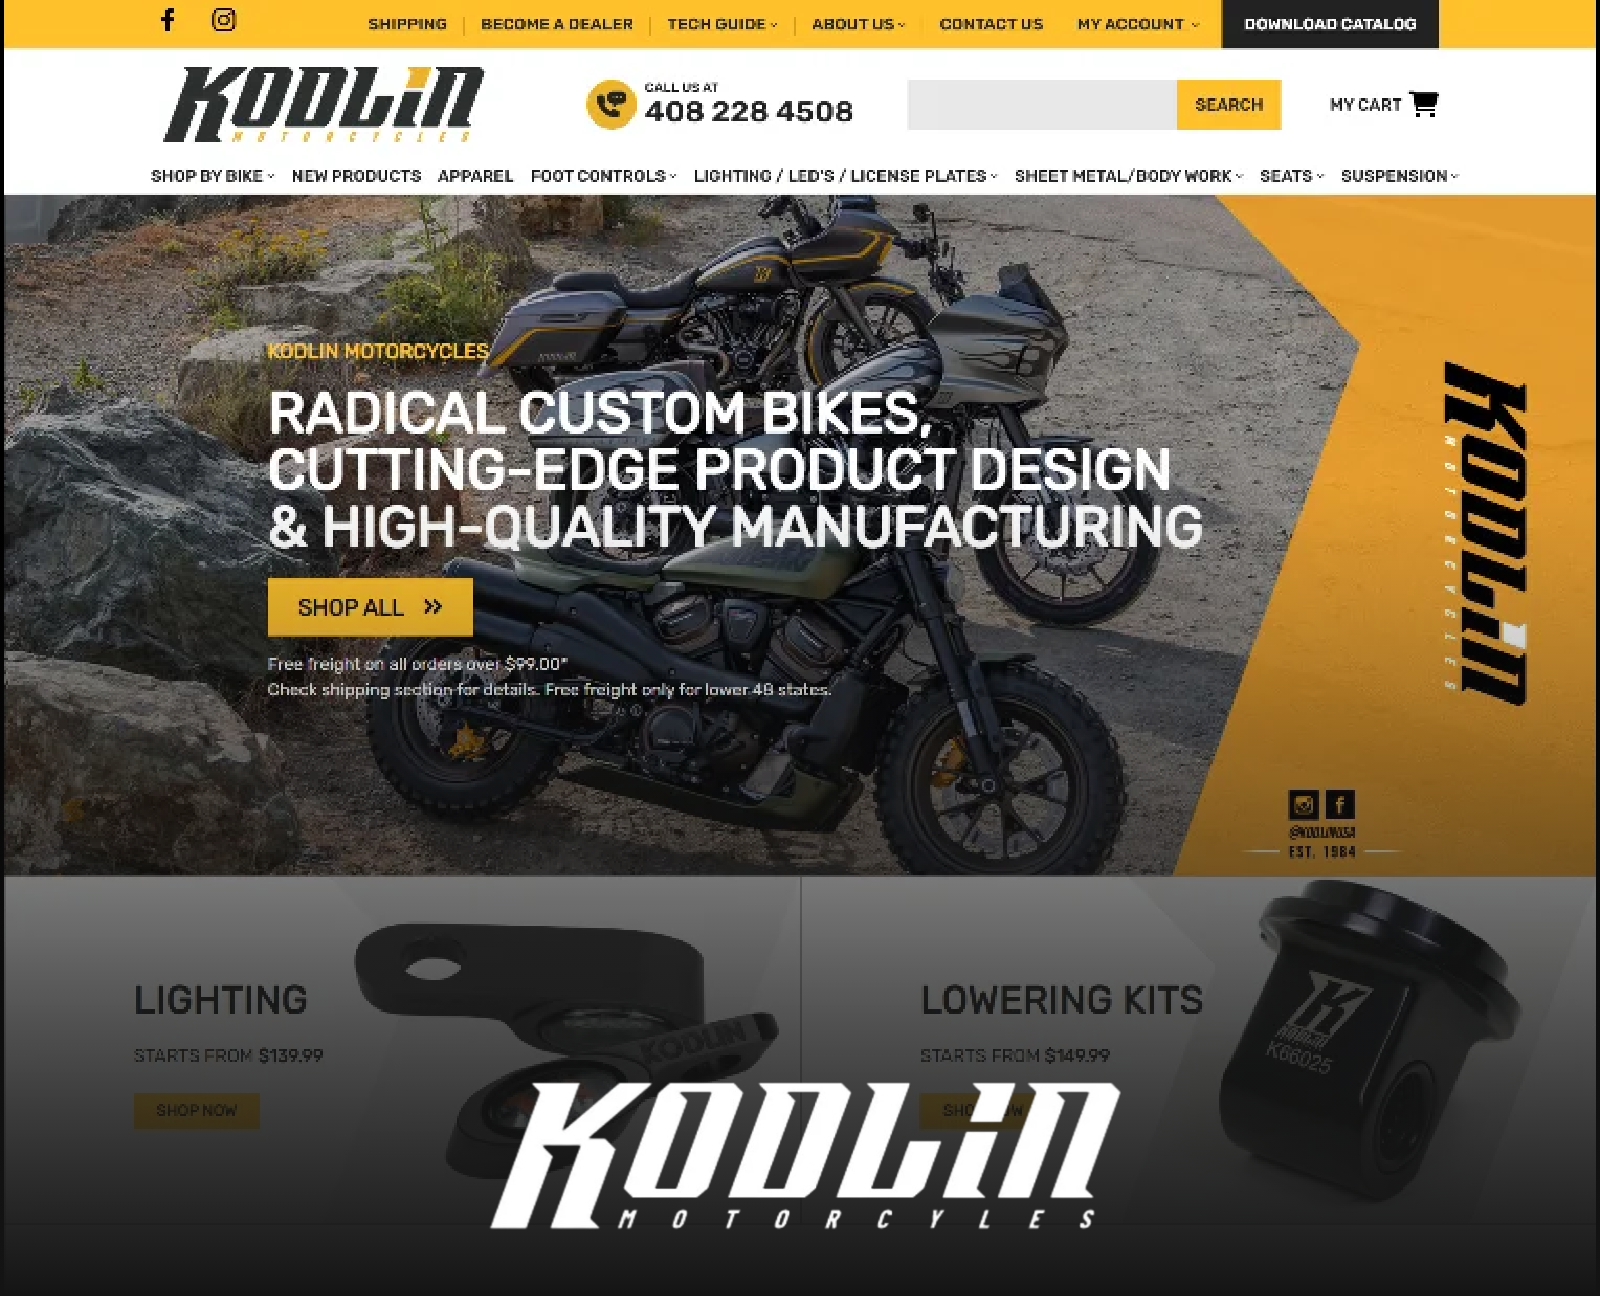 Our Featured Client - Kodlin USA